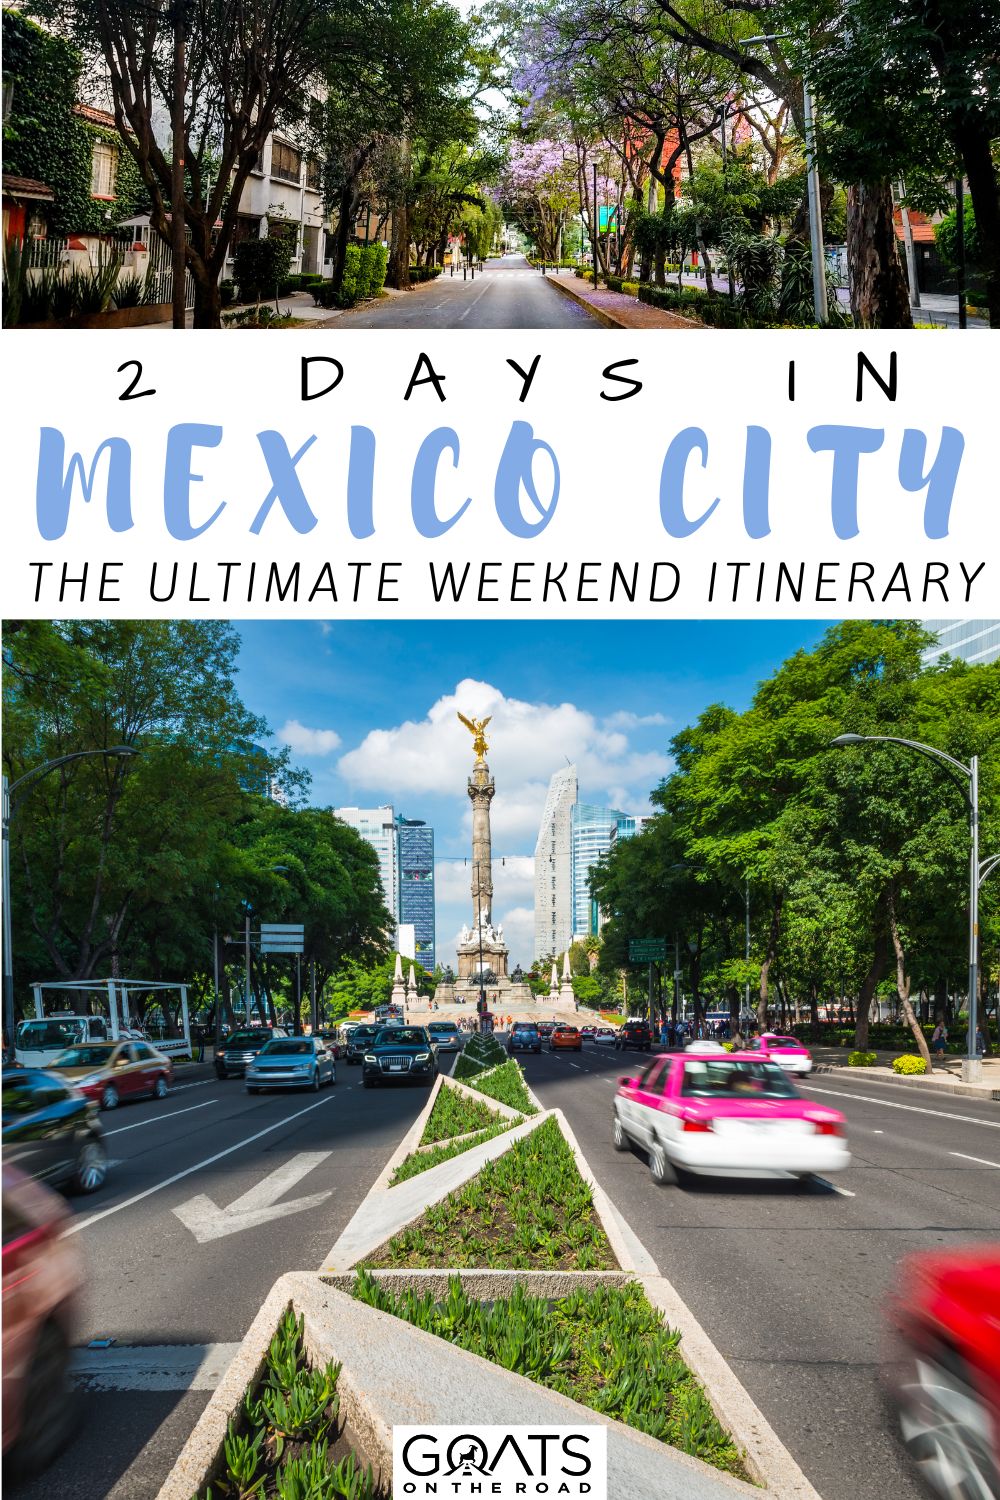 “2 Days in Mexico City: The Ultimate Weekend Itinerary